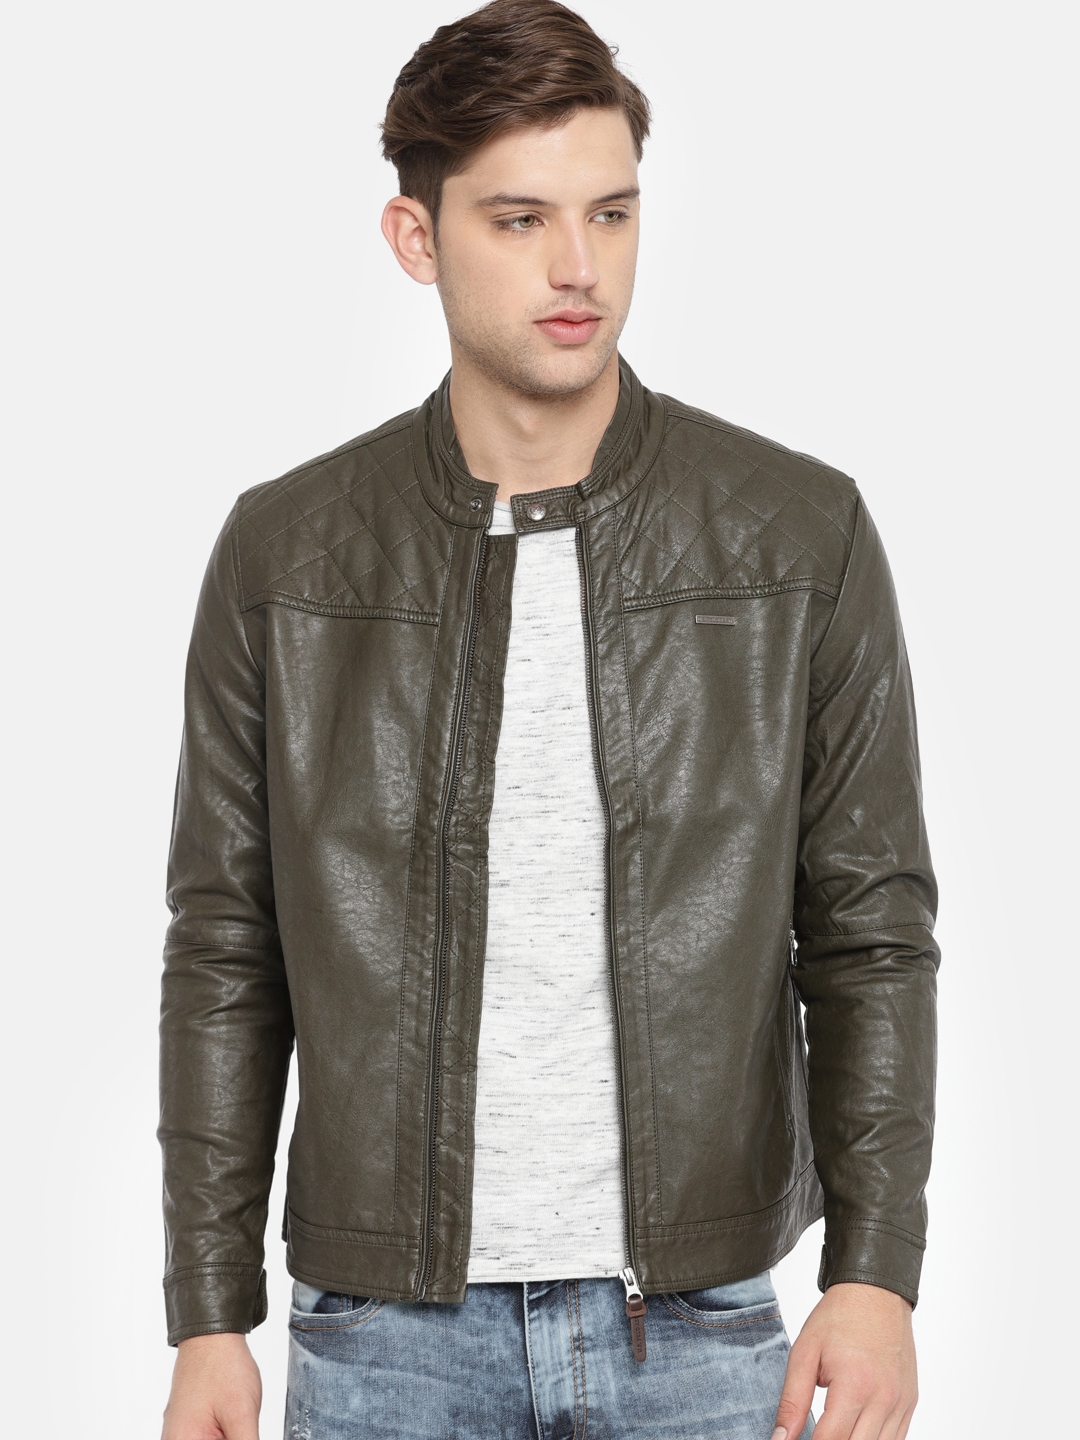 U.S. POLO ASSN. Black Solid Leather Jacket: Buy U.S. POLO ASSN. Black Solid Leather  Jacket Online at Best Price in India | NykaaMan